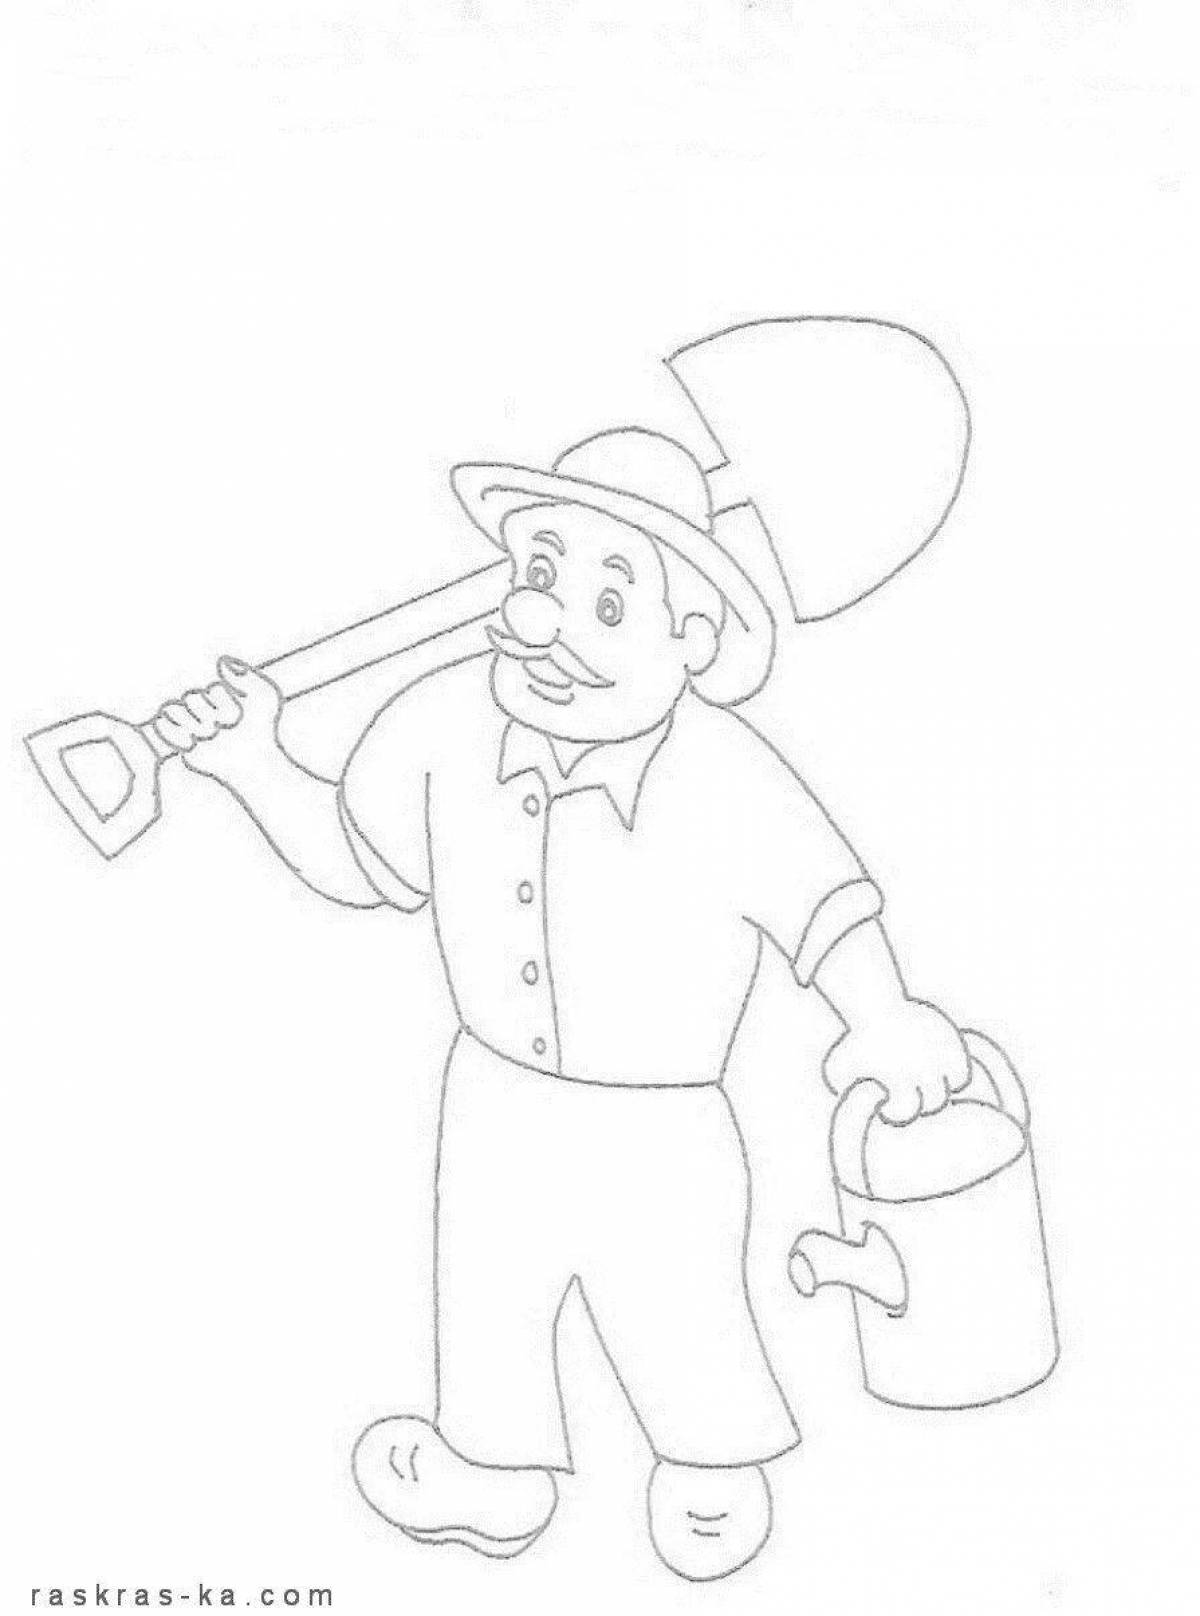 Colorful gardener coloring page